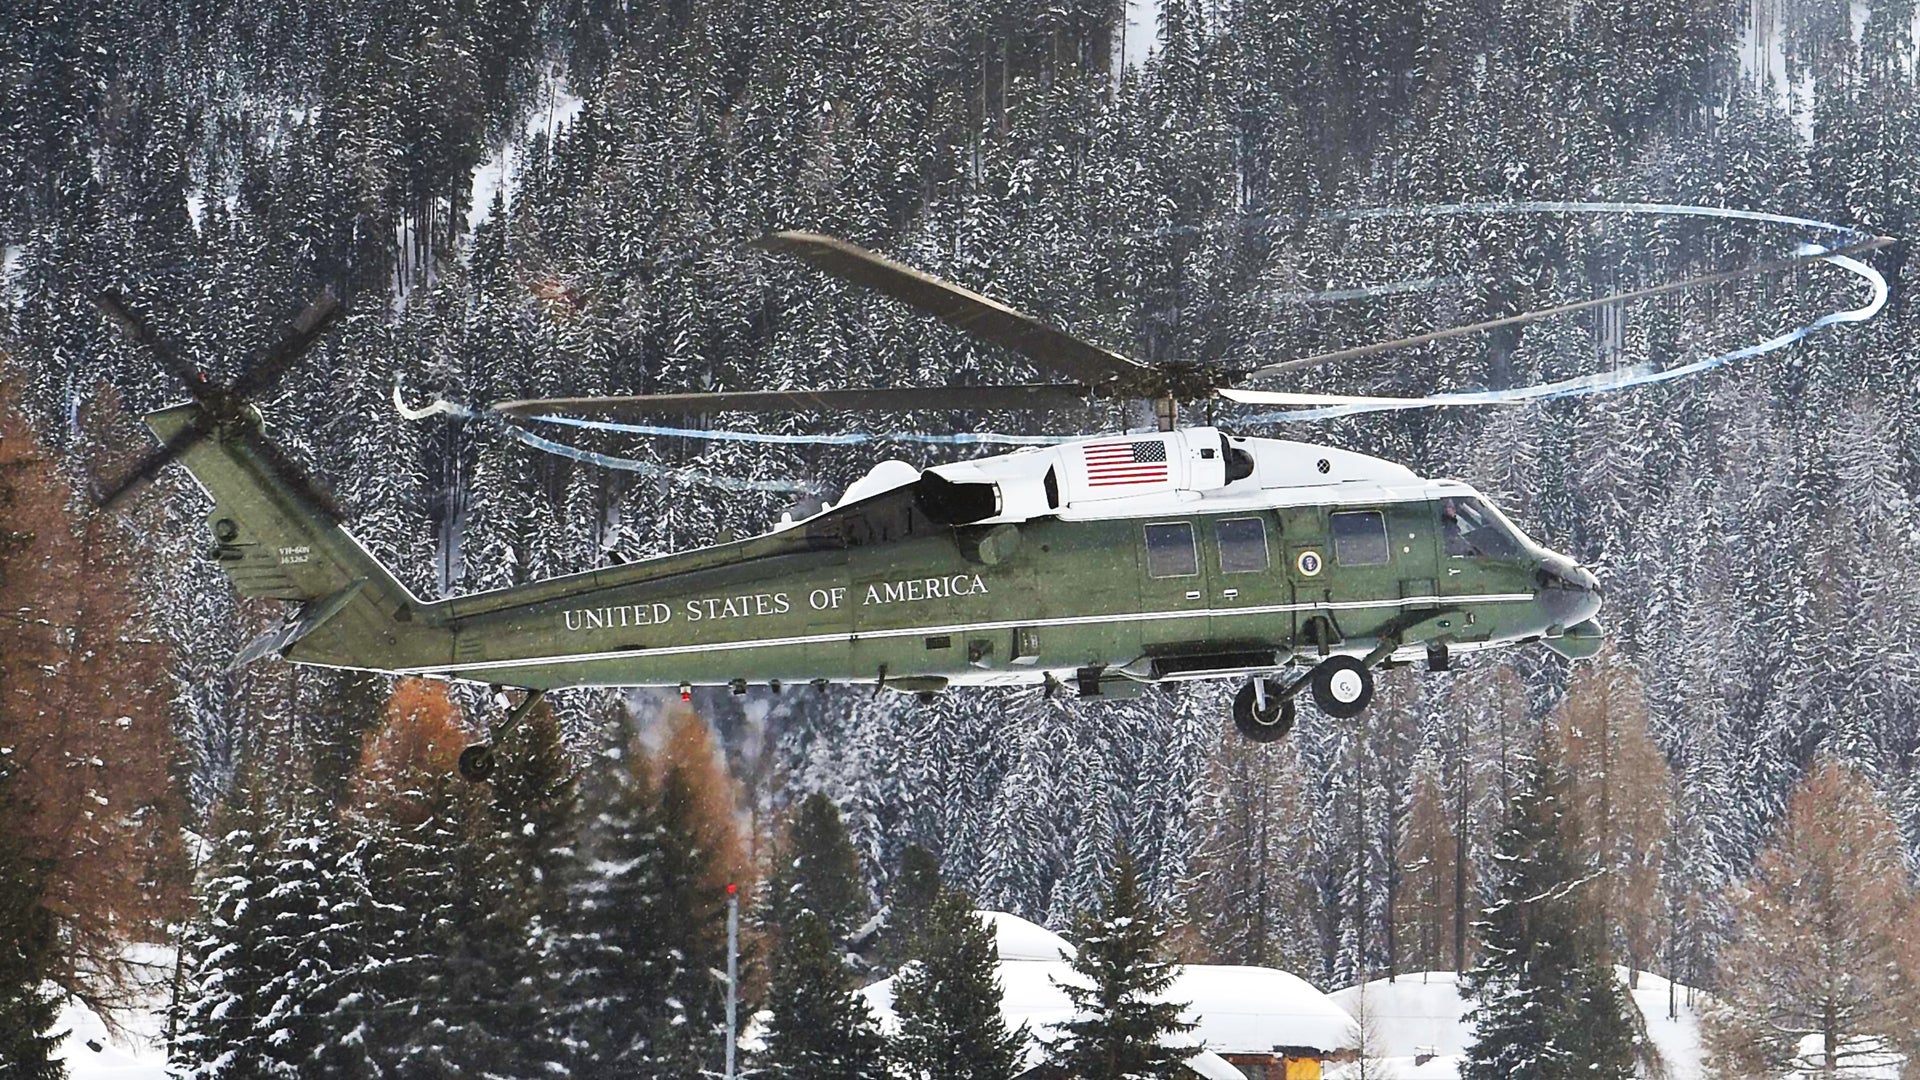 Celebrate President’s Day By Watching Marine One Land In The Snow Covered Swiss Alps